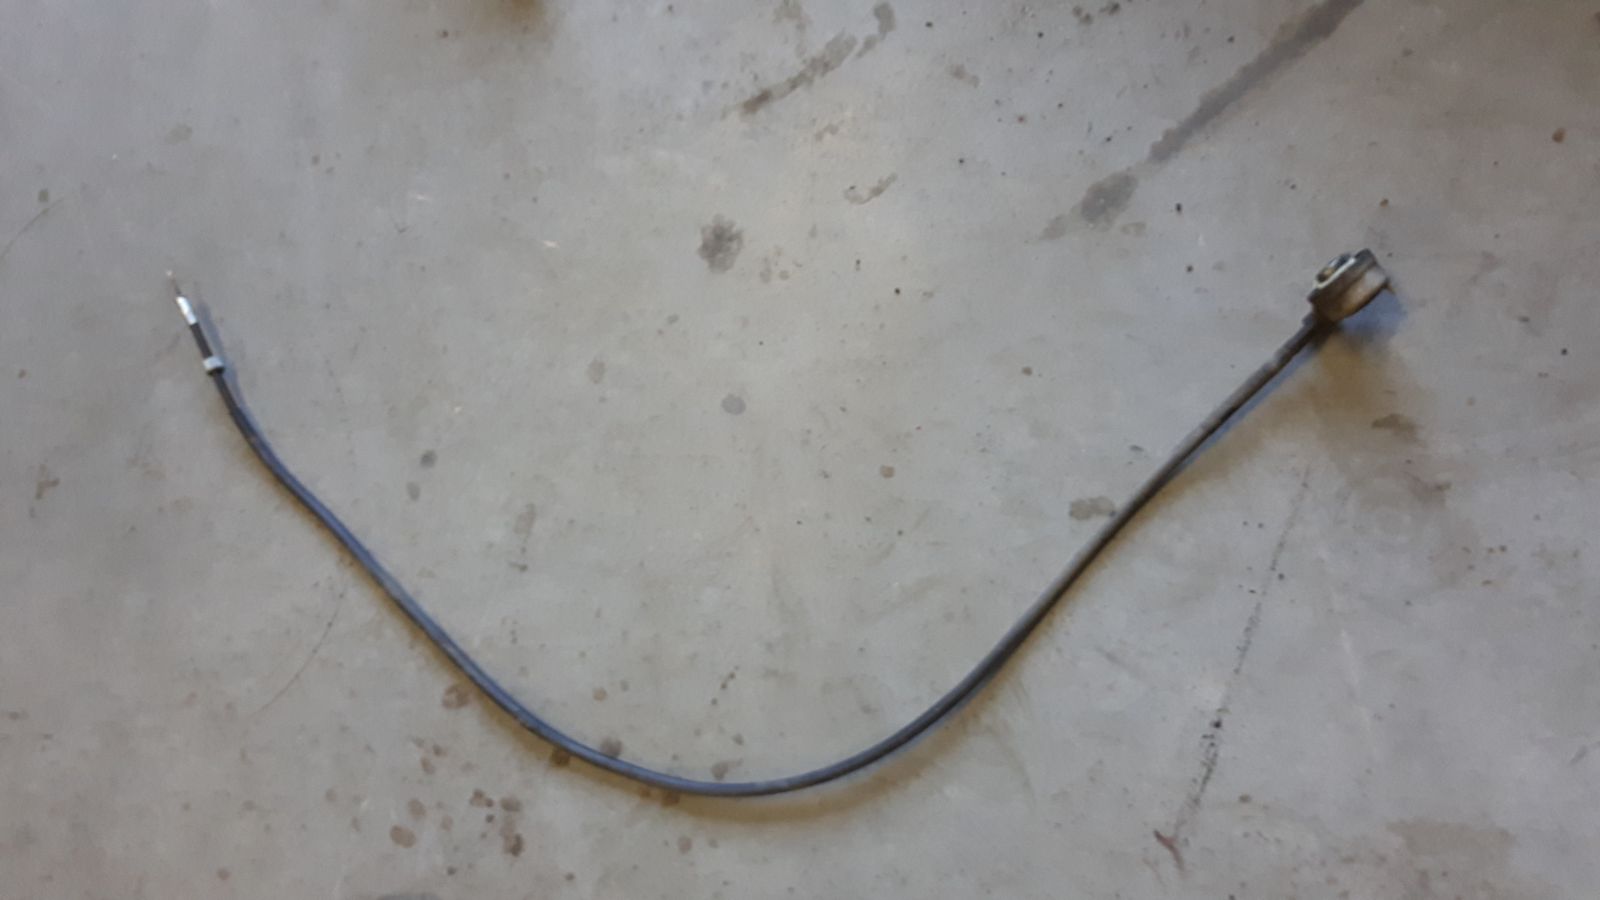 Sym Shark counter cable